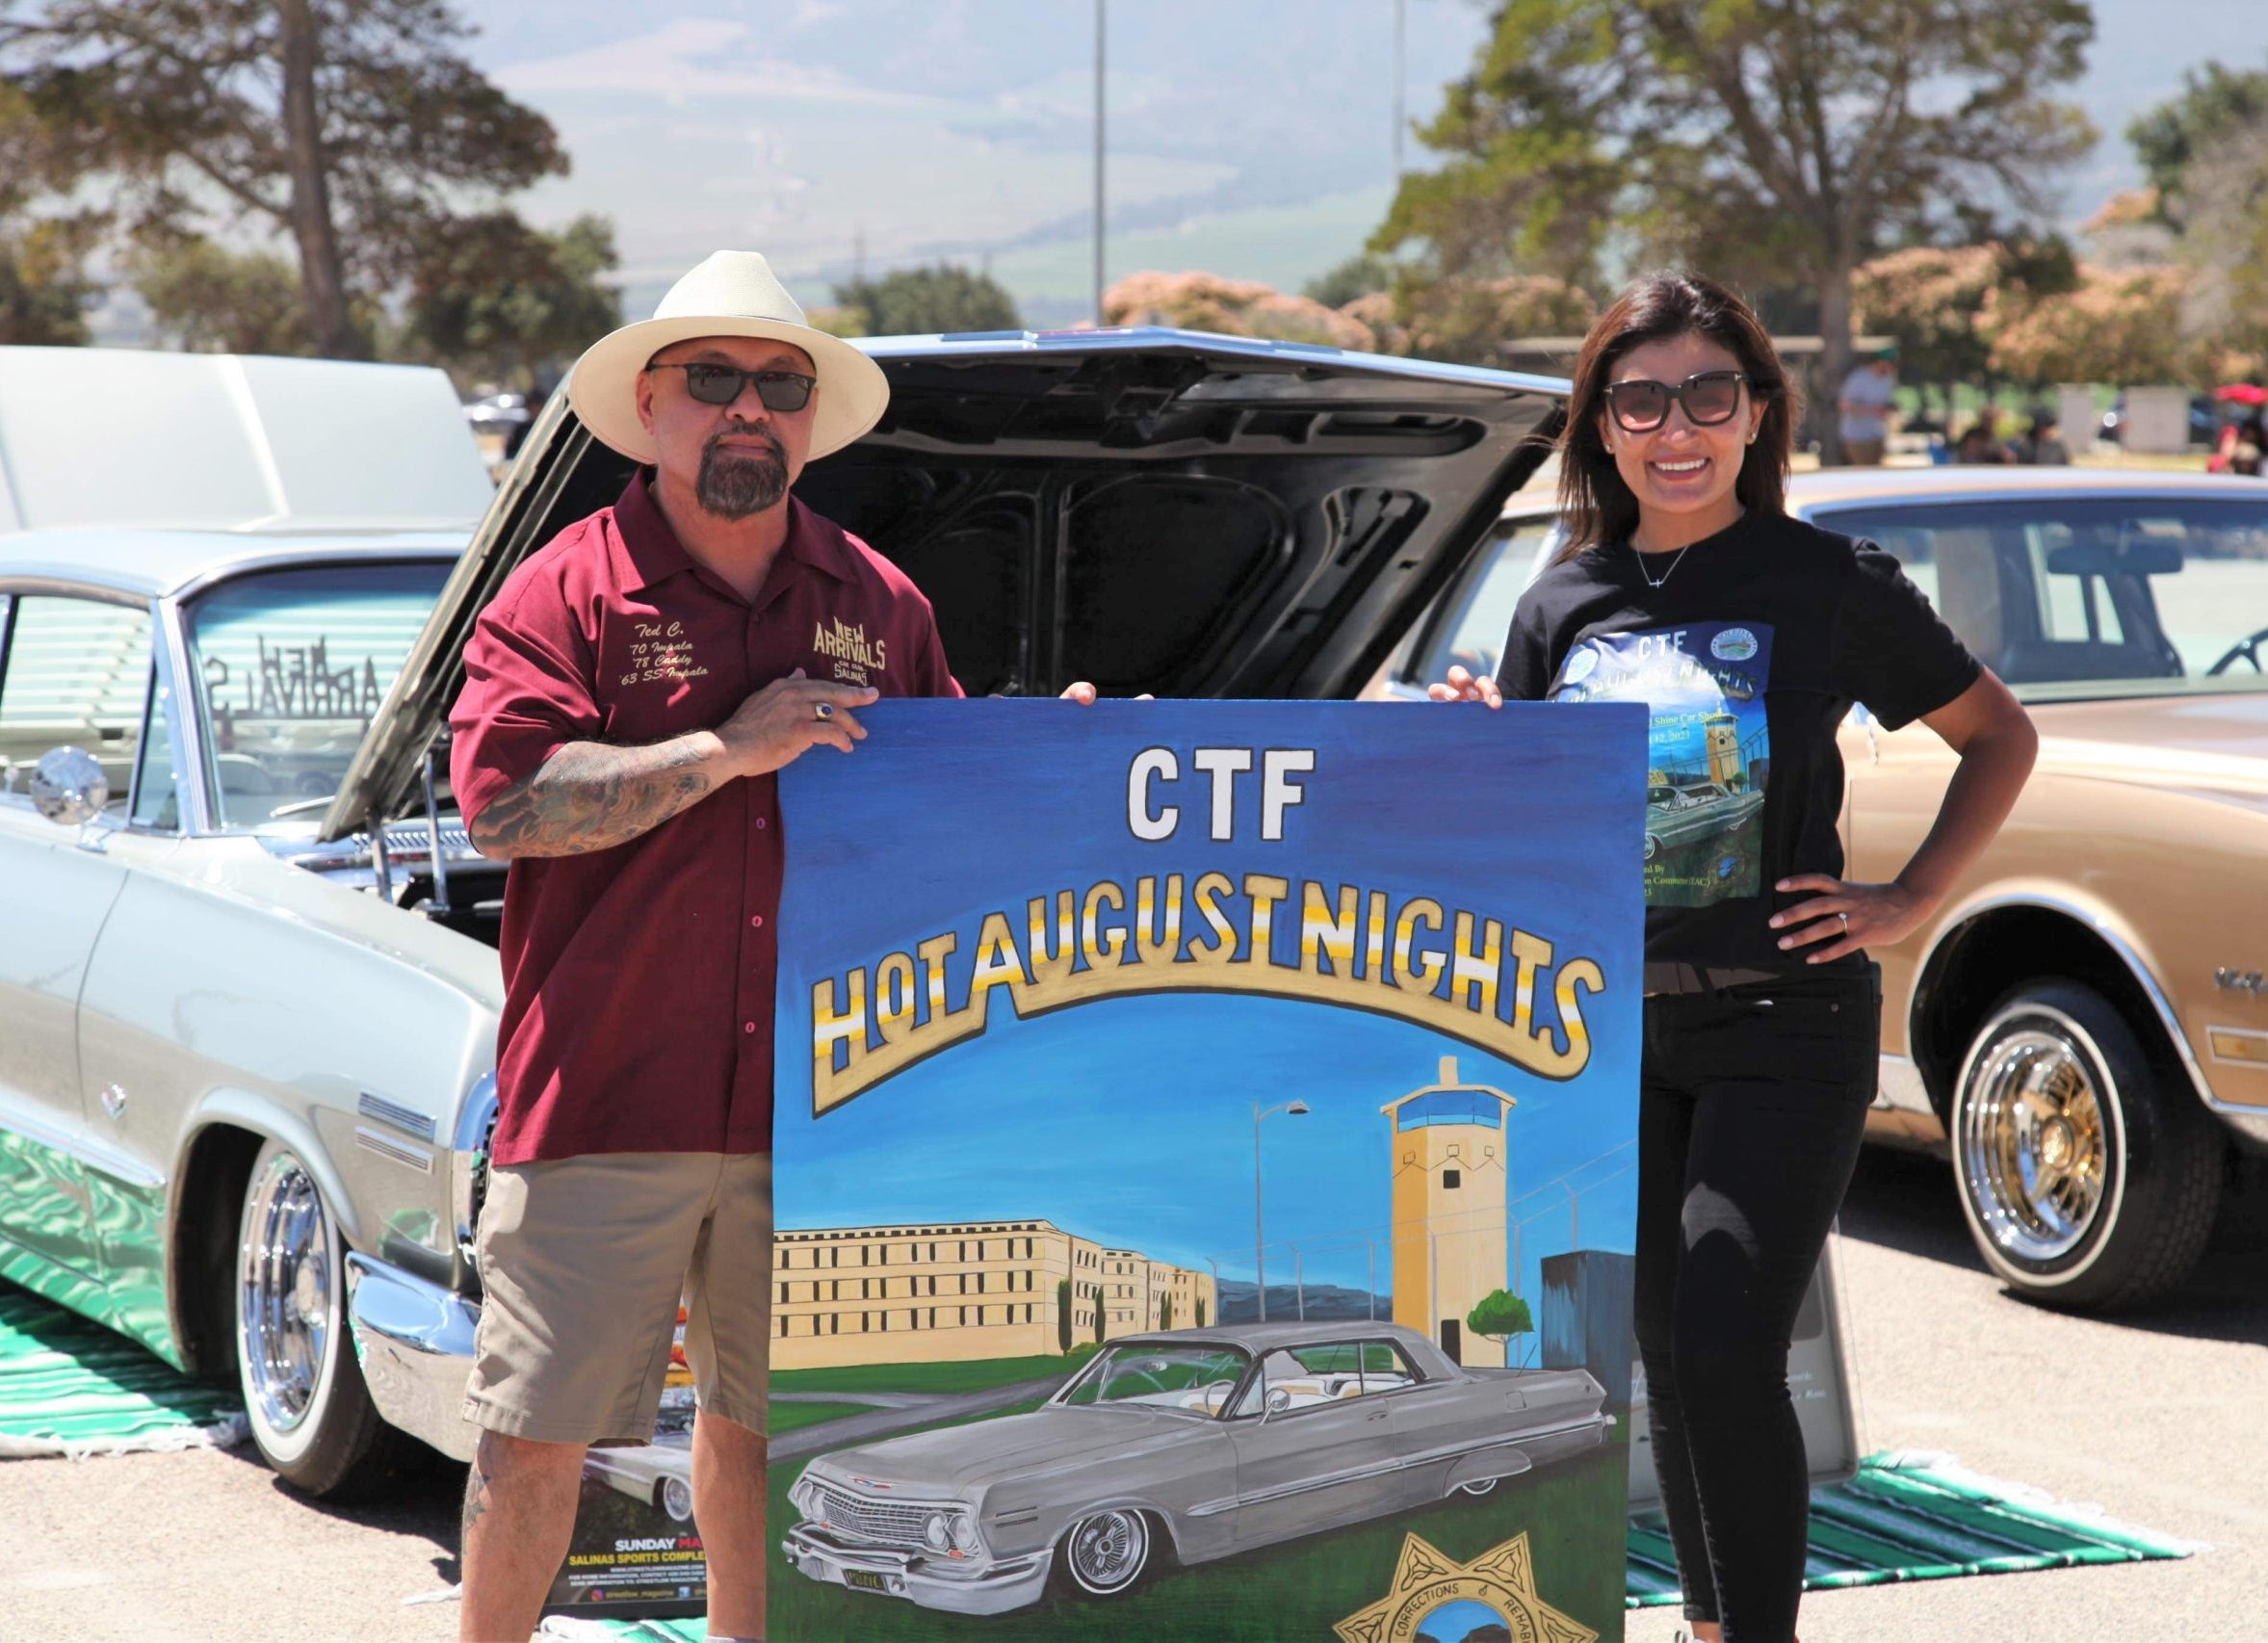 Two people at CTF hold a Hot August Nights car show sign while standing in front of vehicles.